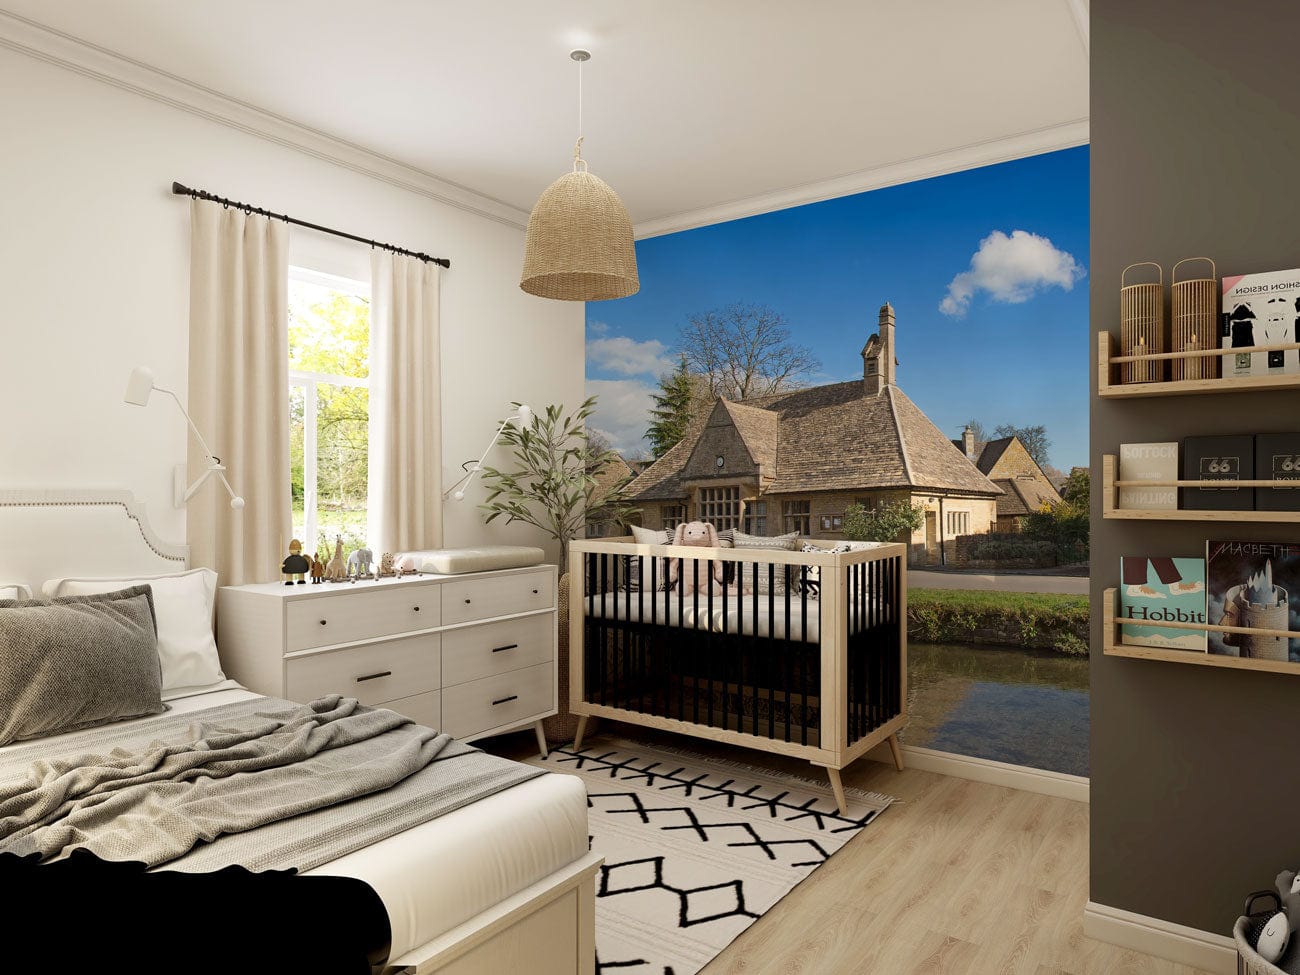 Wallpaper mural featuring a lower slaughter scene for use in interior design of bedrooms